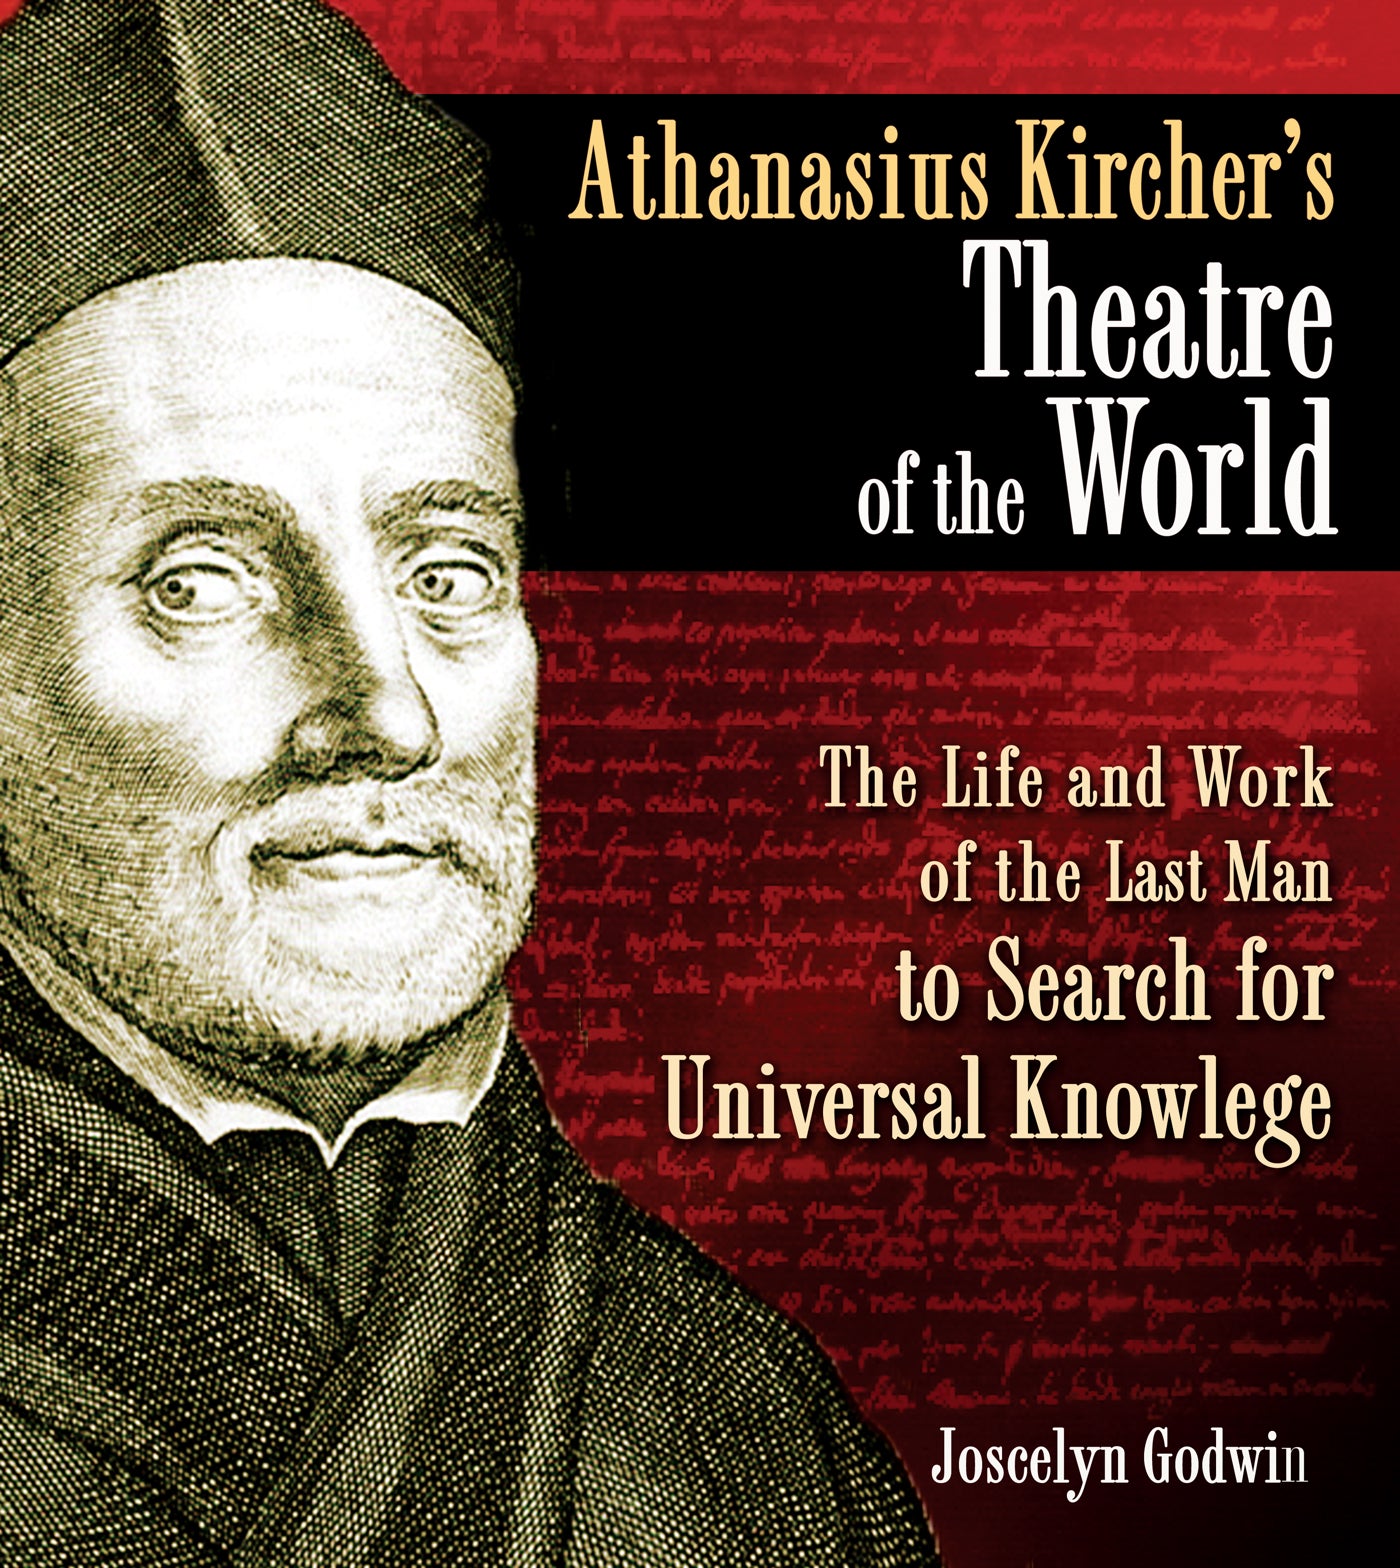 Athanasius Kircher's Theatre of the World : The Life and Work of the Last Man to Search for Universal Knowledge